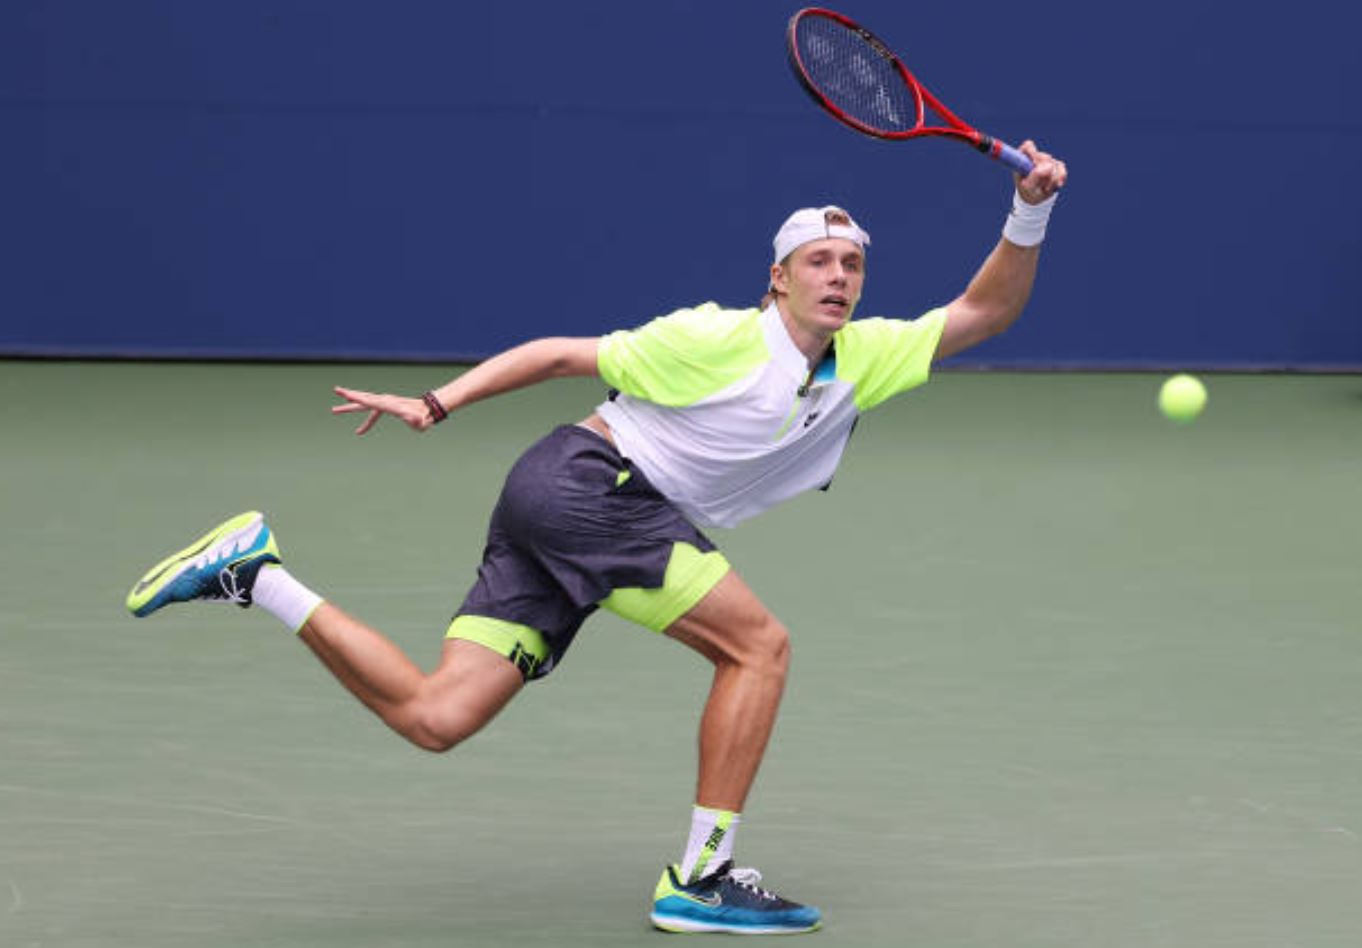 Shapovalov on Youzhny: "He's definitely made me a smarter player out there" - Tennis Now